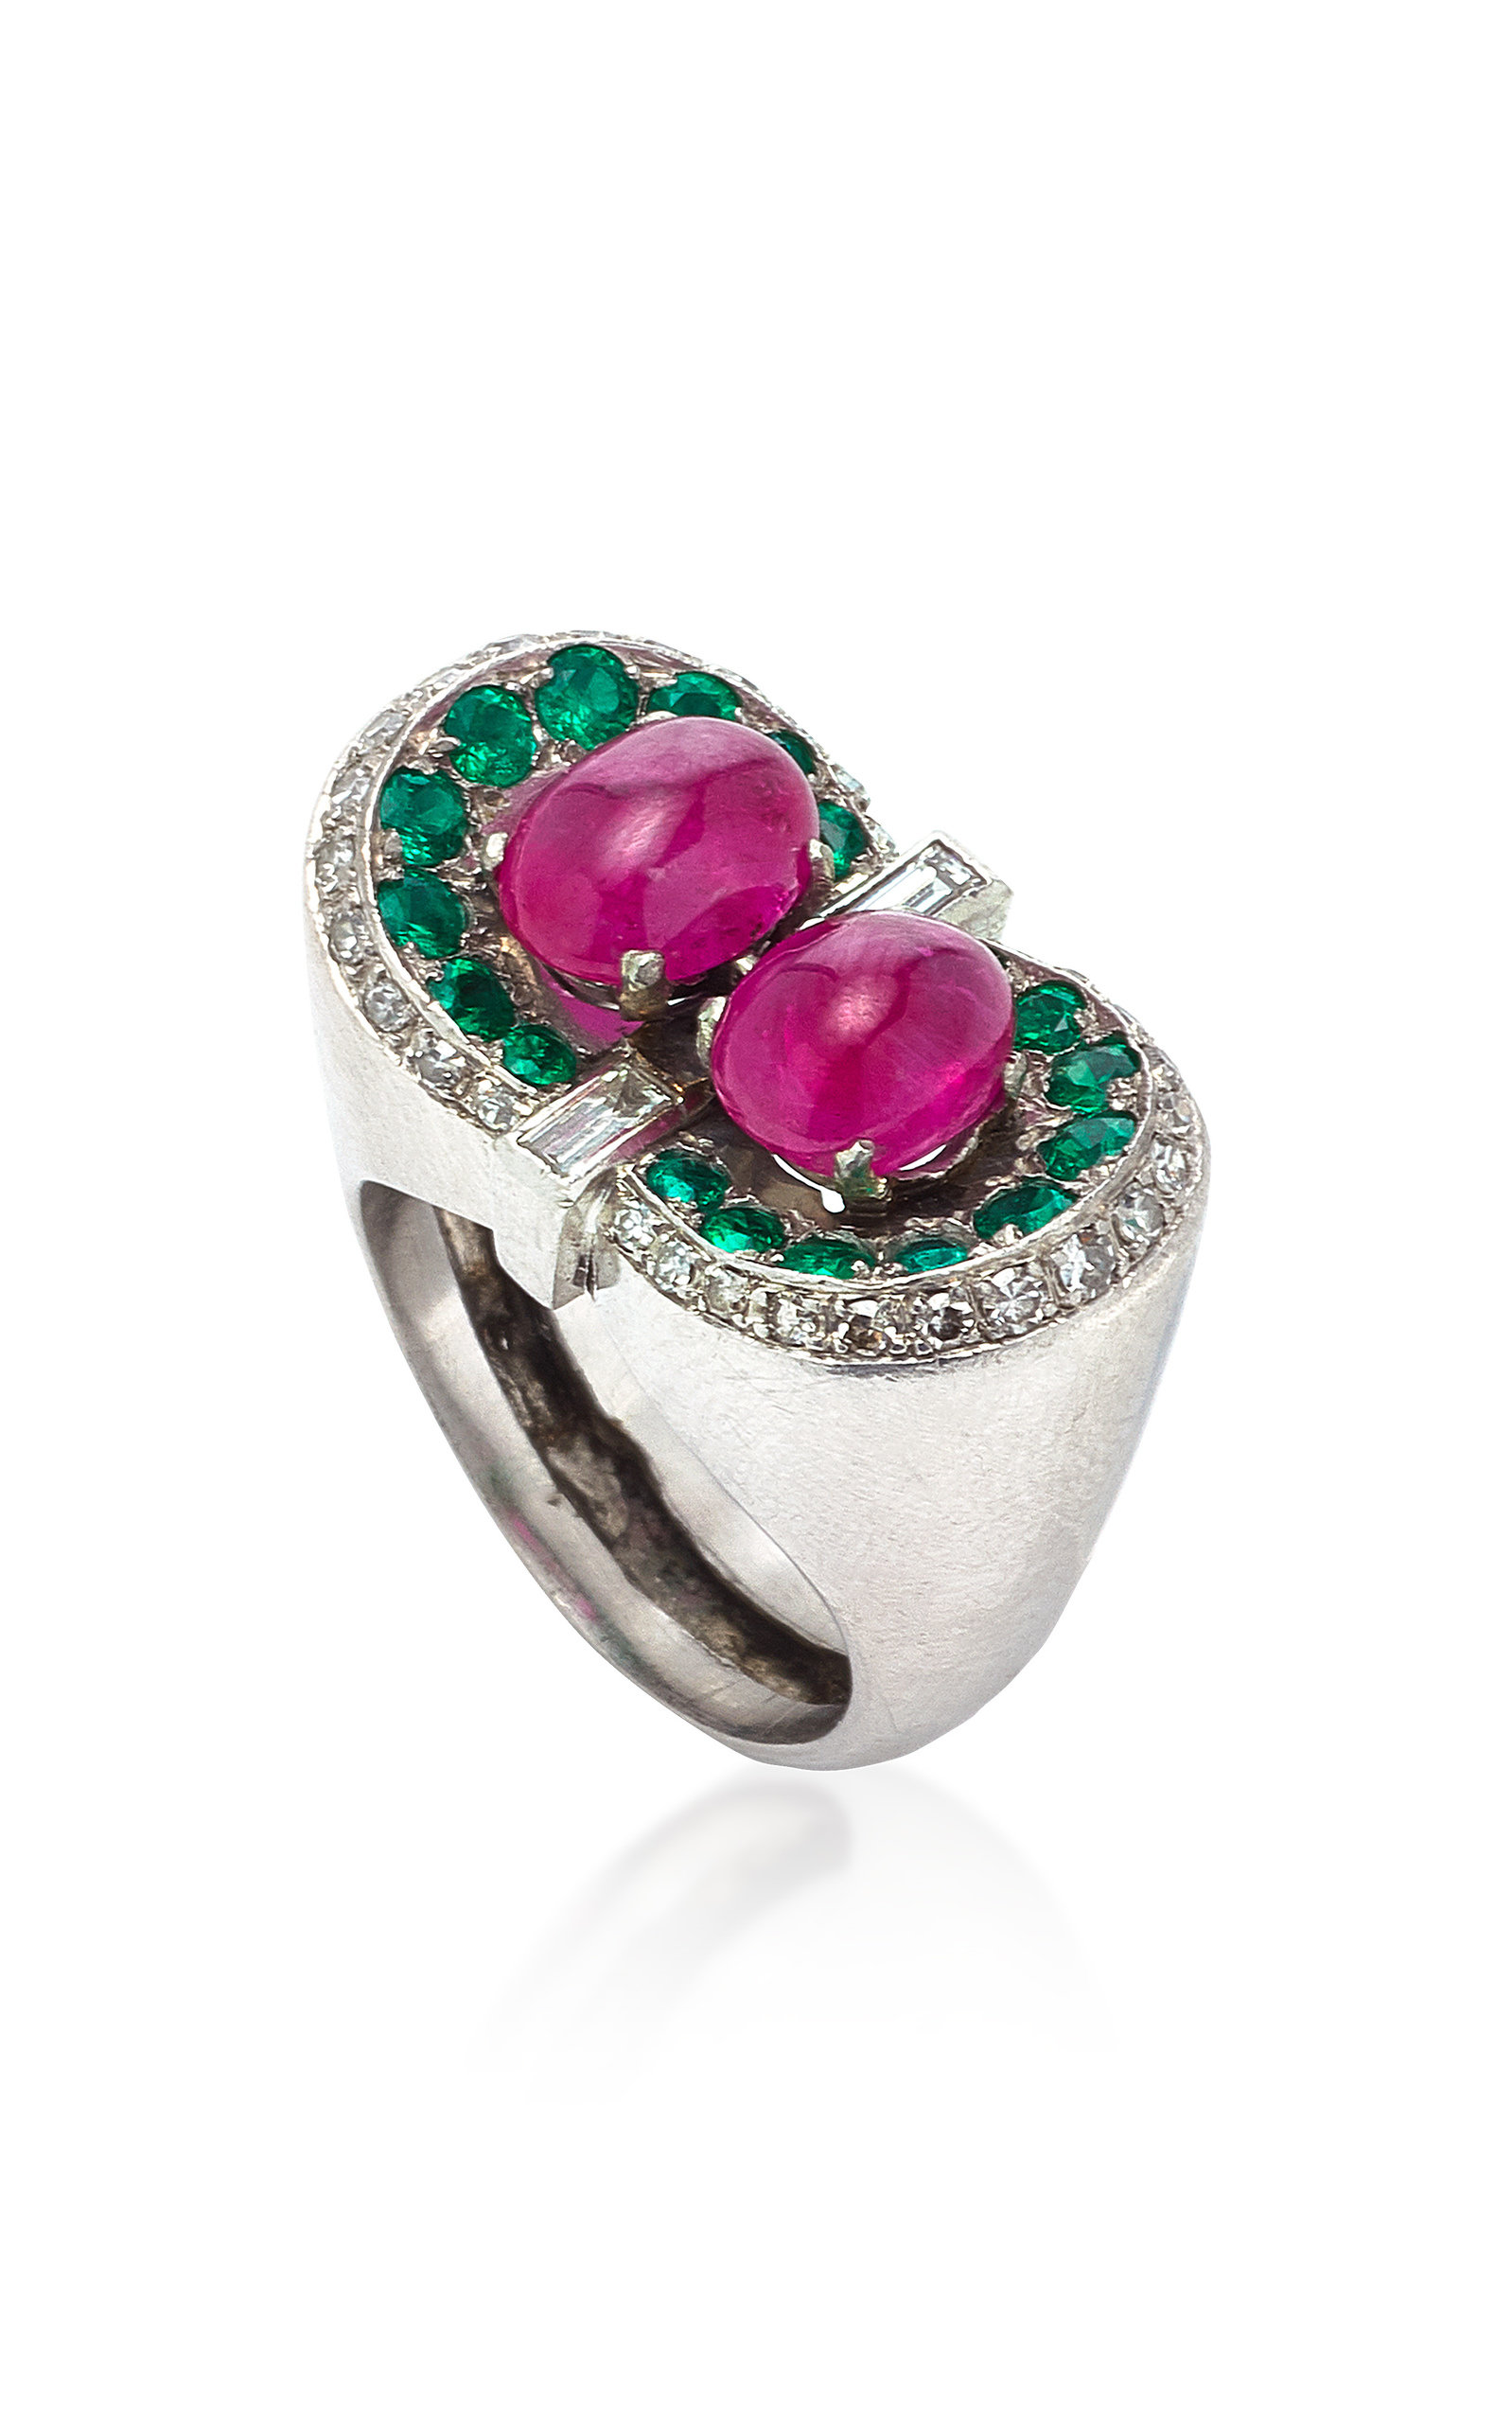 Buy Redgem 925 Silver Ring for Women Natural Emerald Ruby Green Pink 4X6 MM  Oval at Amazon.in